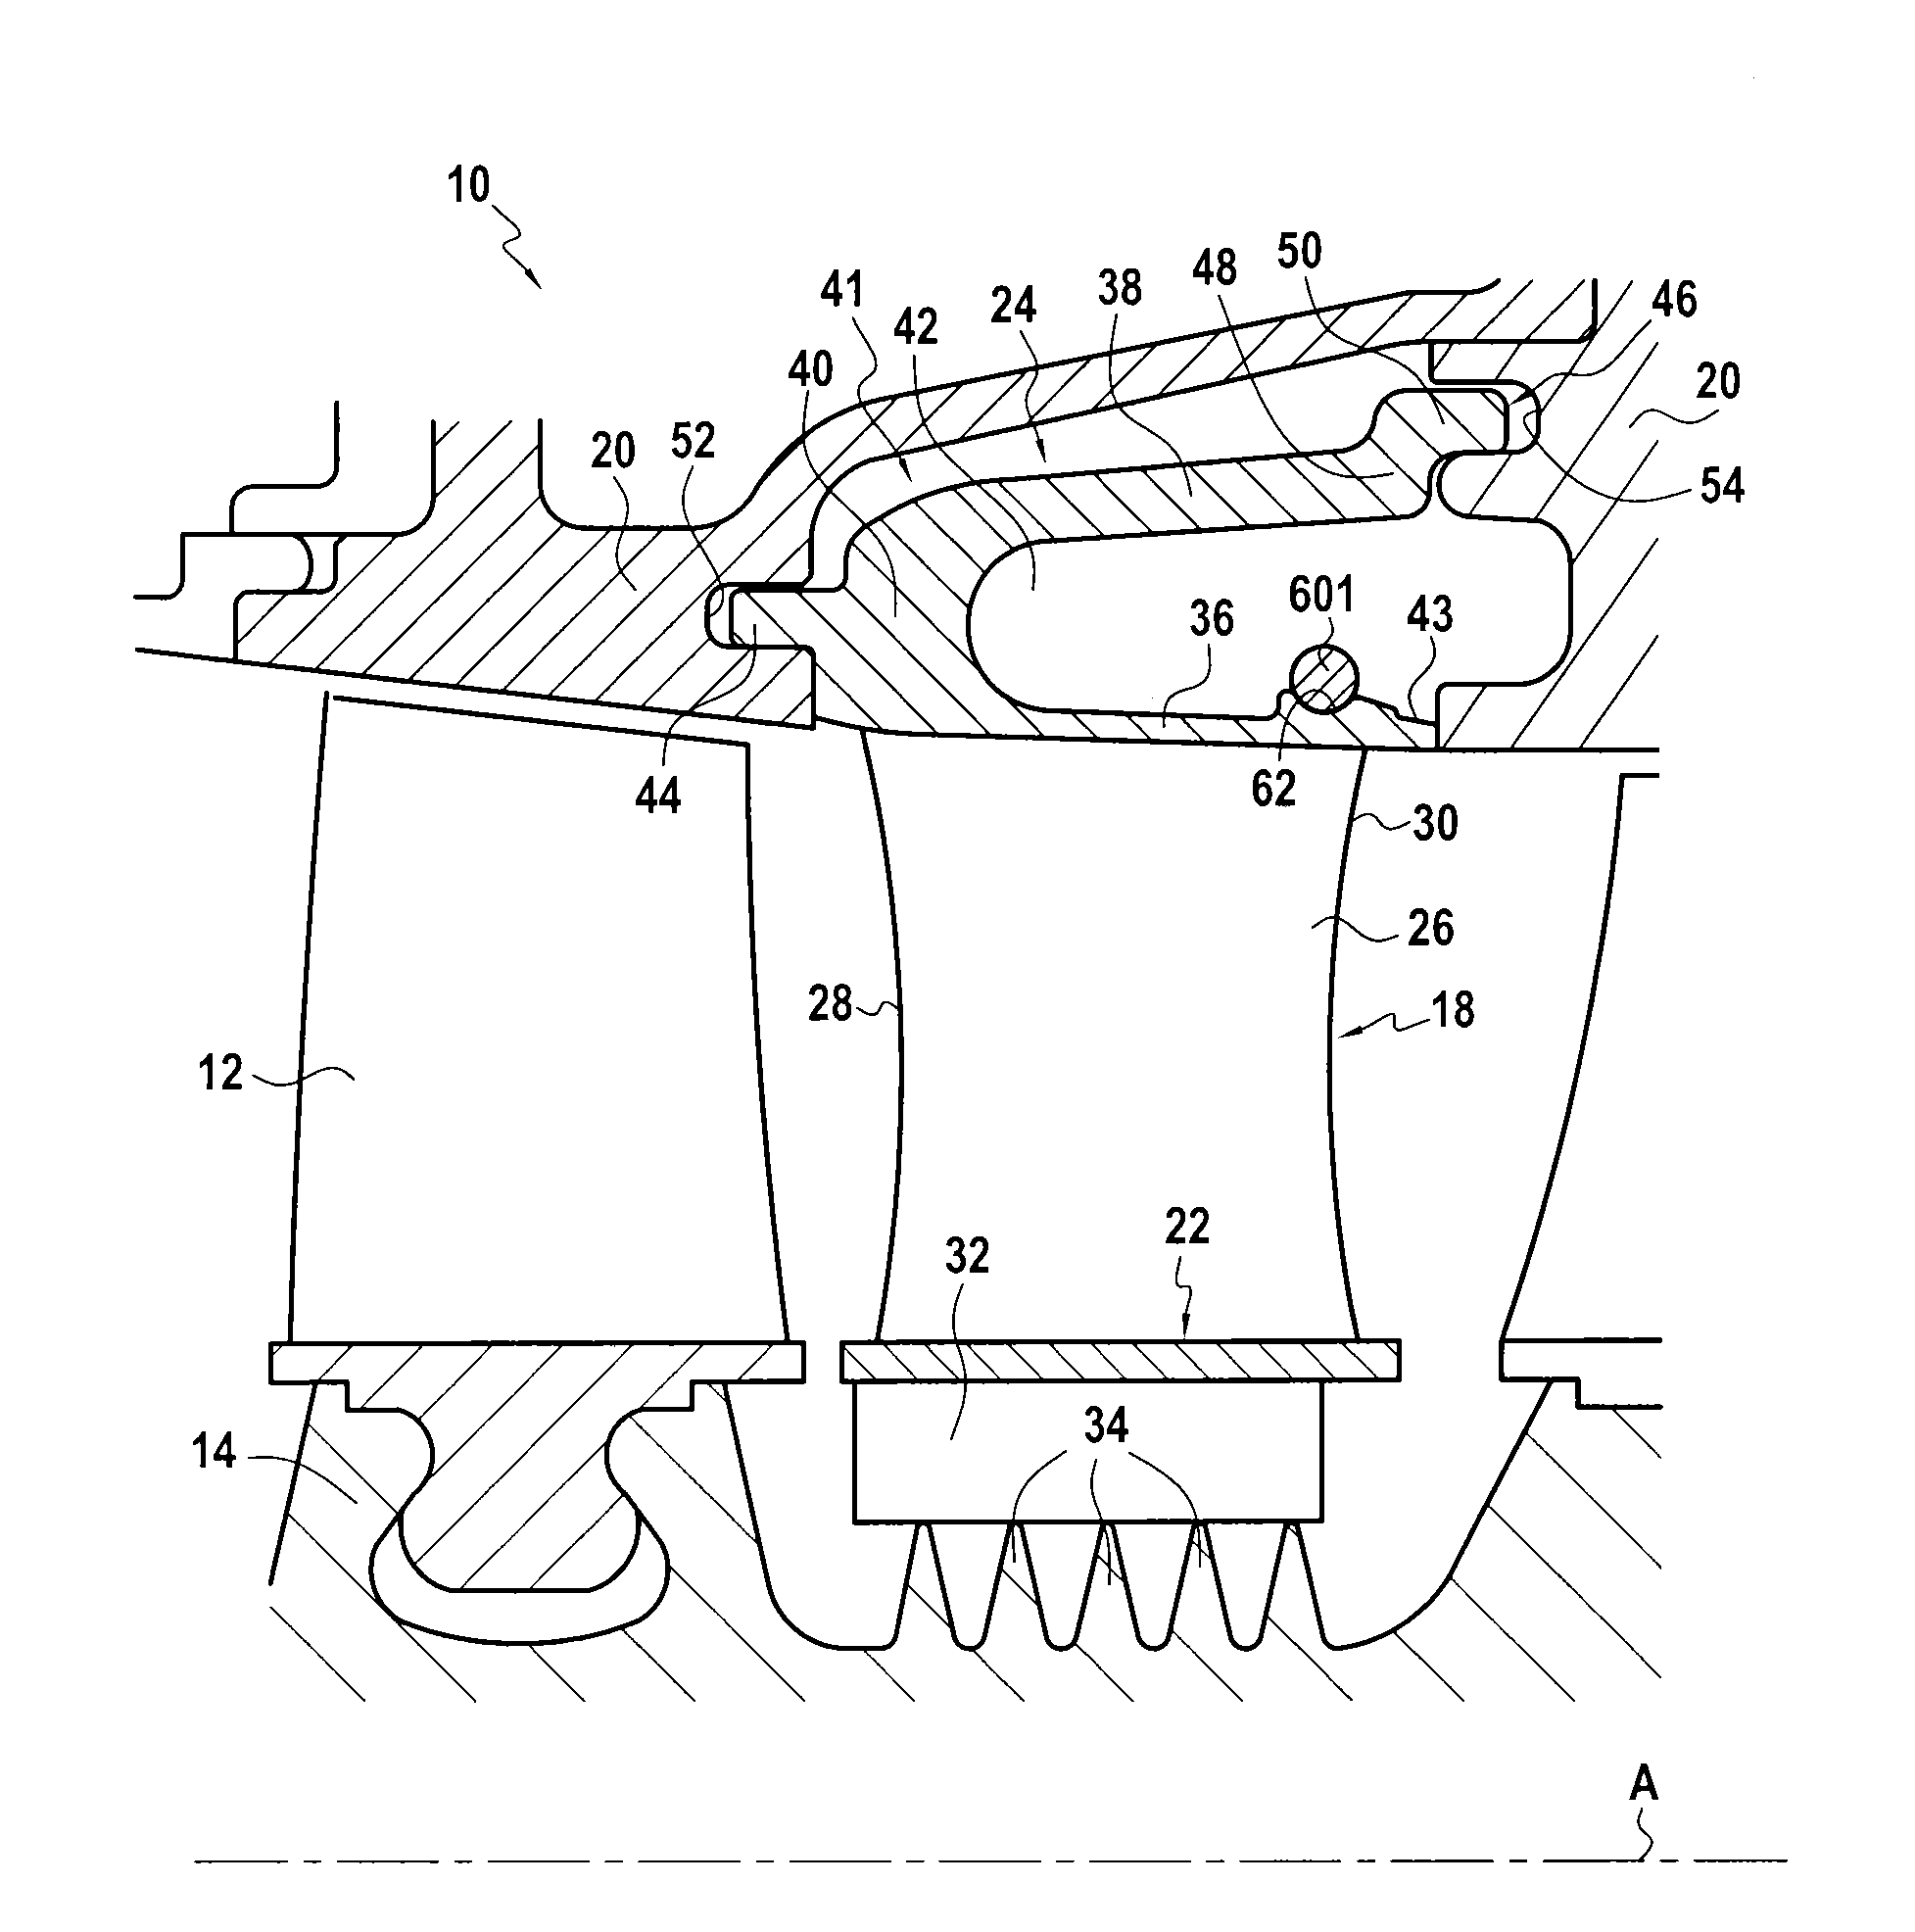 Angular sector of a stator for a turbine engine compressor, a turbine engine stator, and a turbine engine including such a sector